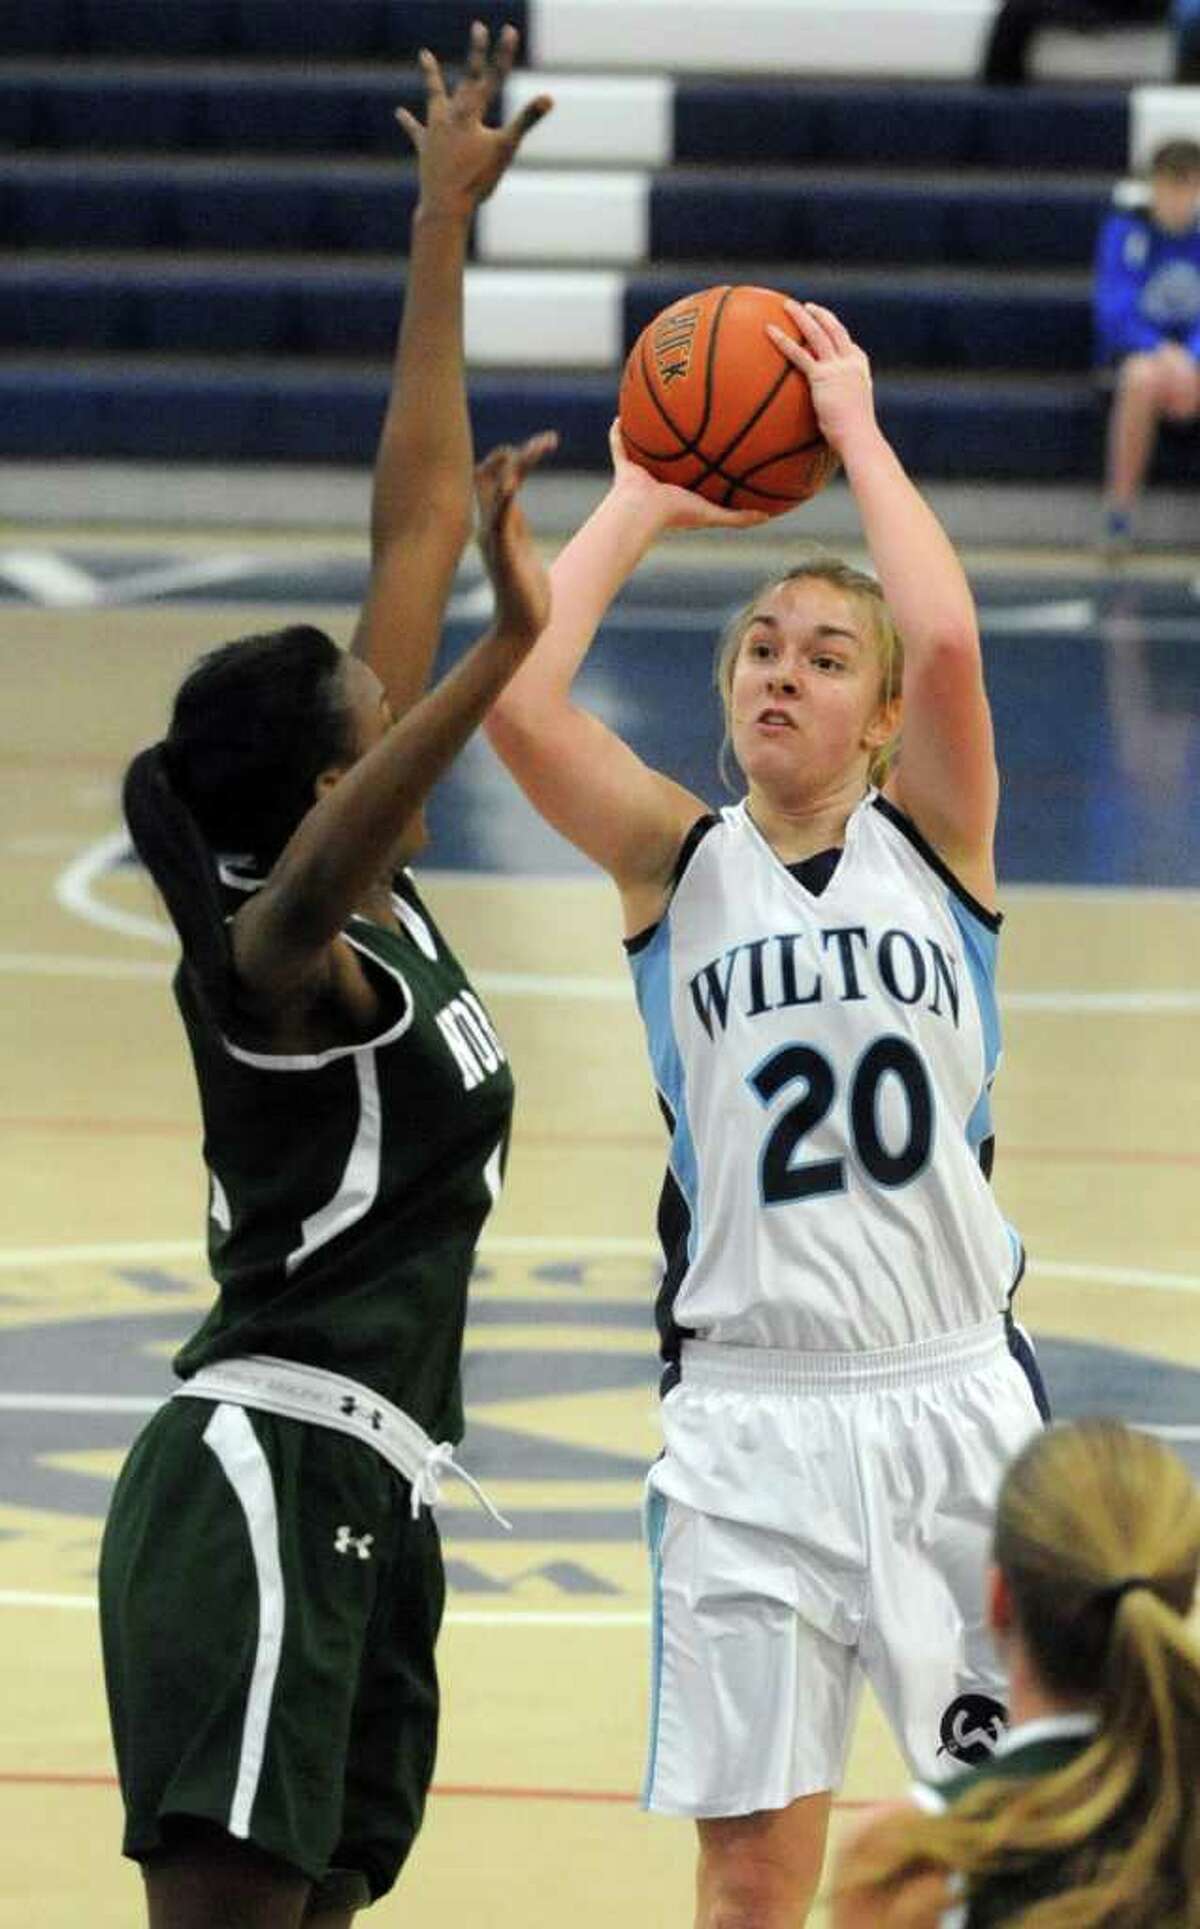 Wilton's Maddy Fulton takes a shot as she is defended by Norwalk's Emma Oyomba during Saturday's FCIAC Girls Basketball quarterfinal game at Wilton High School on February 18, 2012.